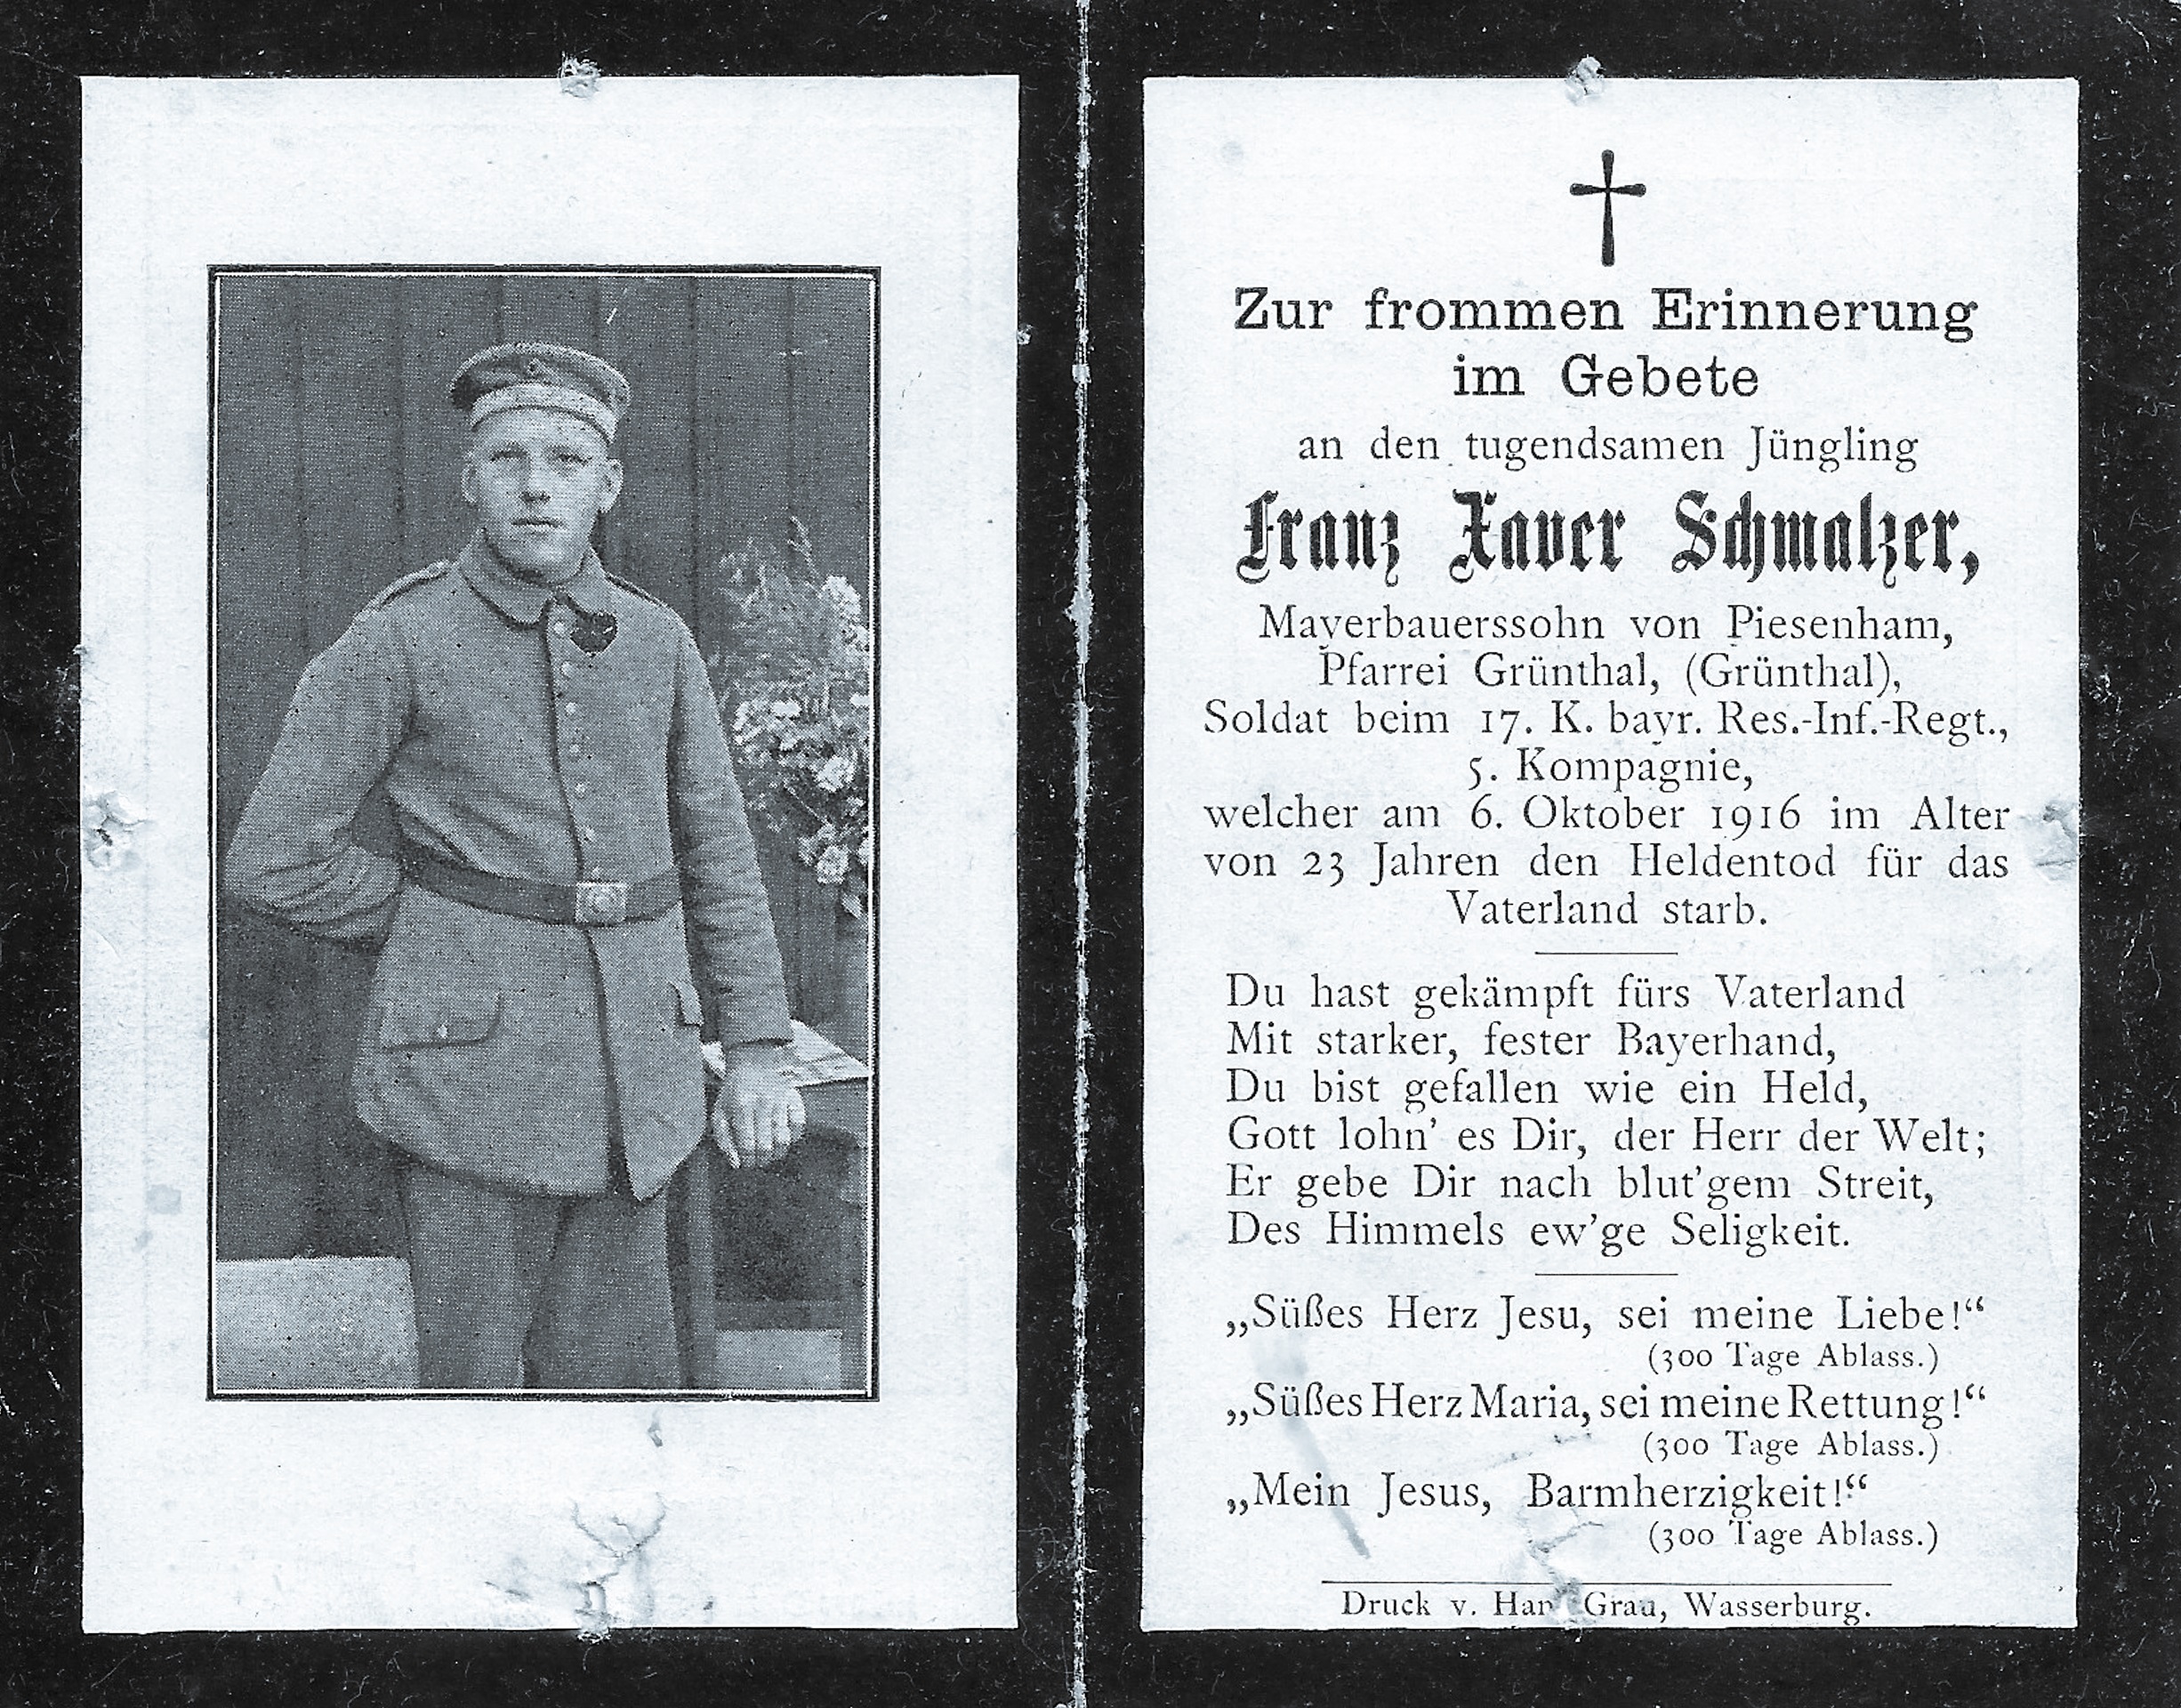 "Death card for Franz Schmalzer Bavarian regiment".  Died at Le Sars 6 October 1916 Taken by Collection of Bob Paterson 1916